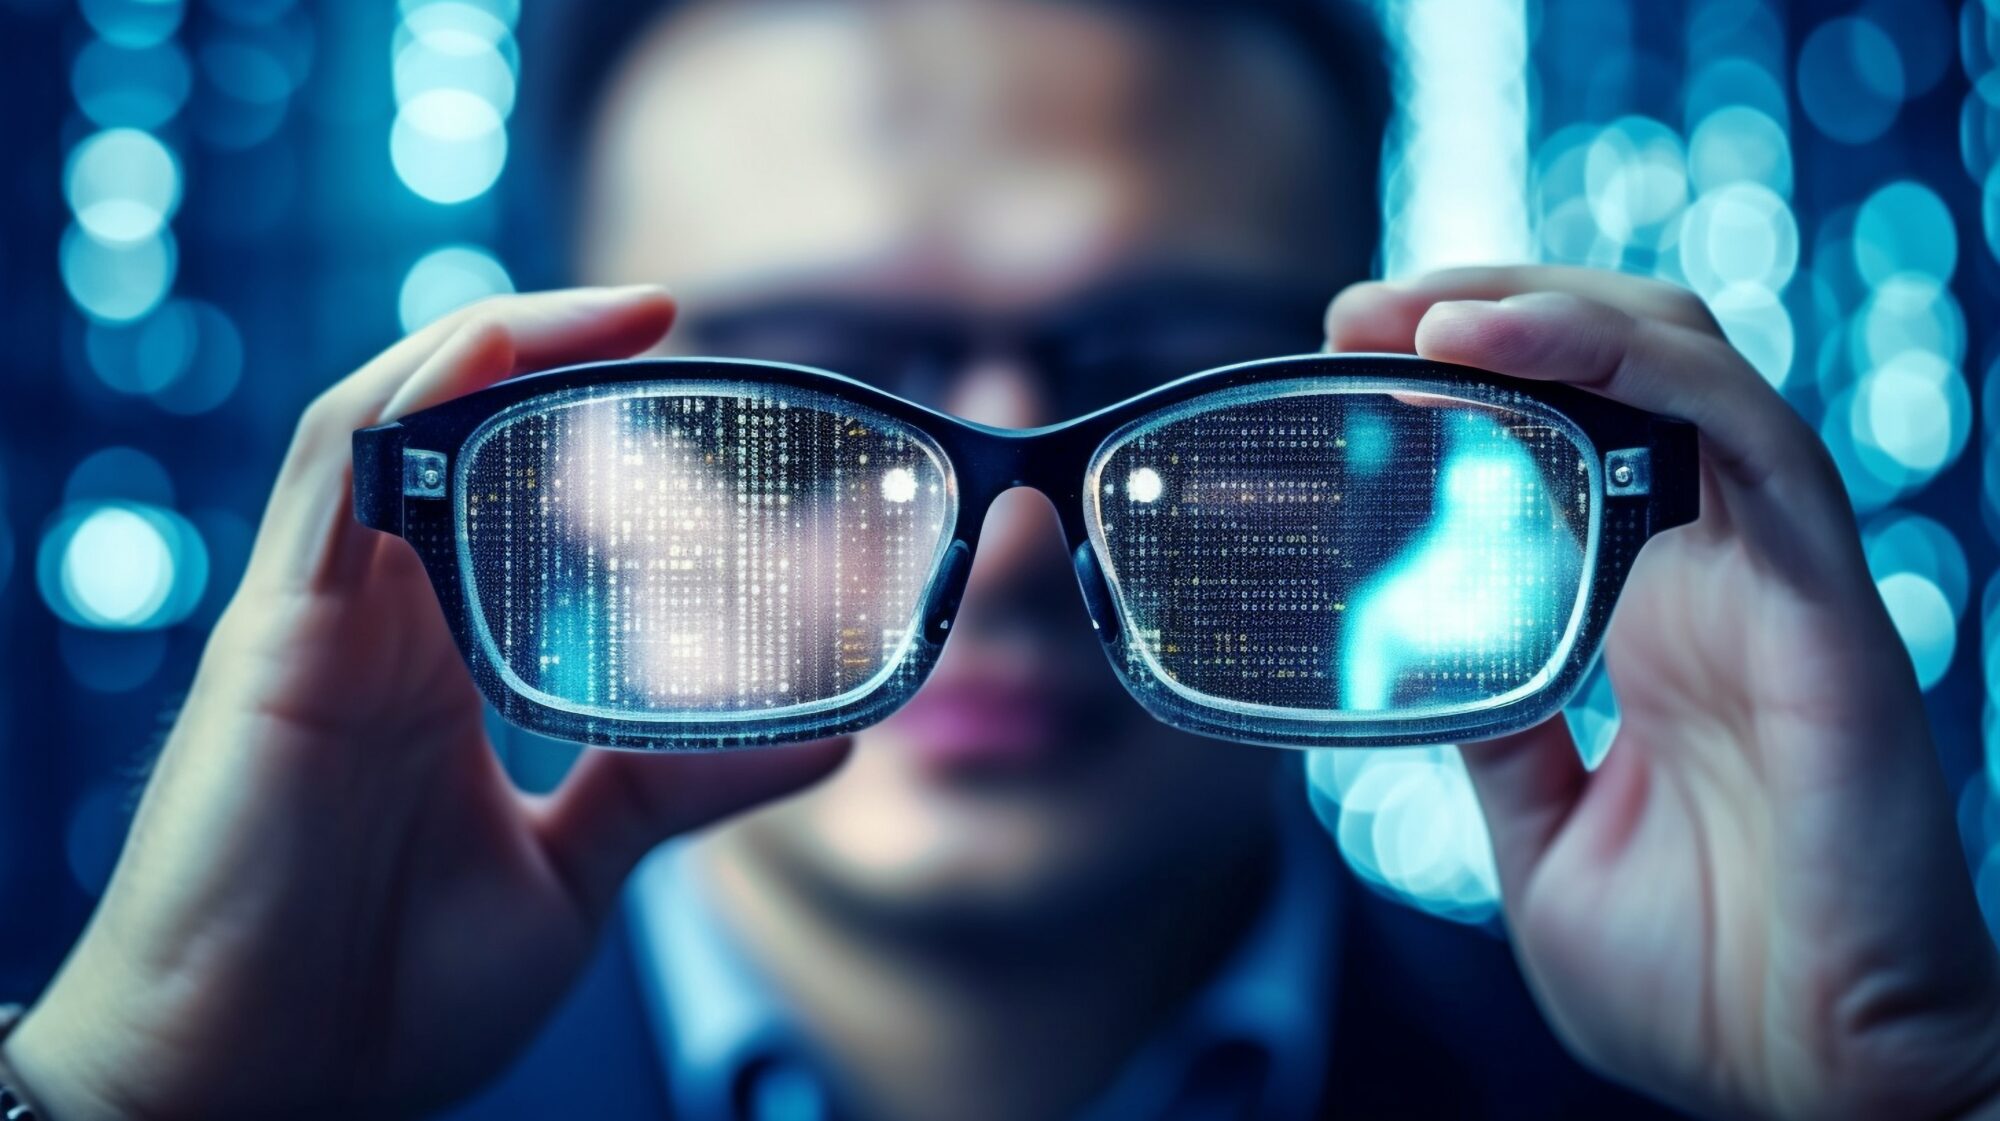 A man wearing high tech smart glasses searches for a block chain